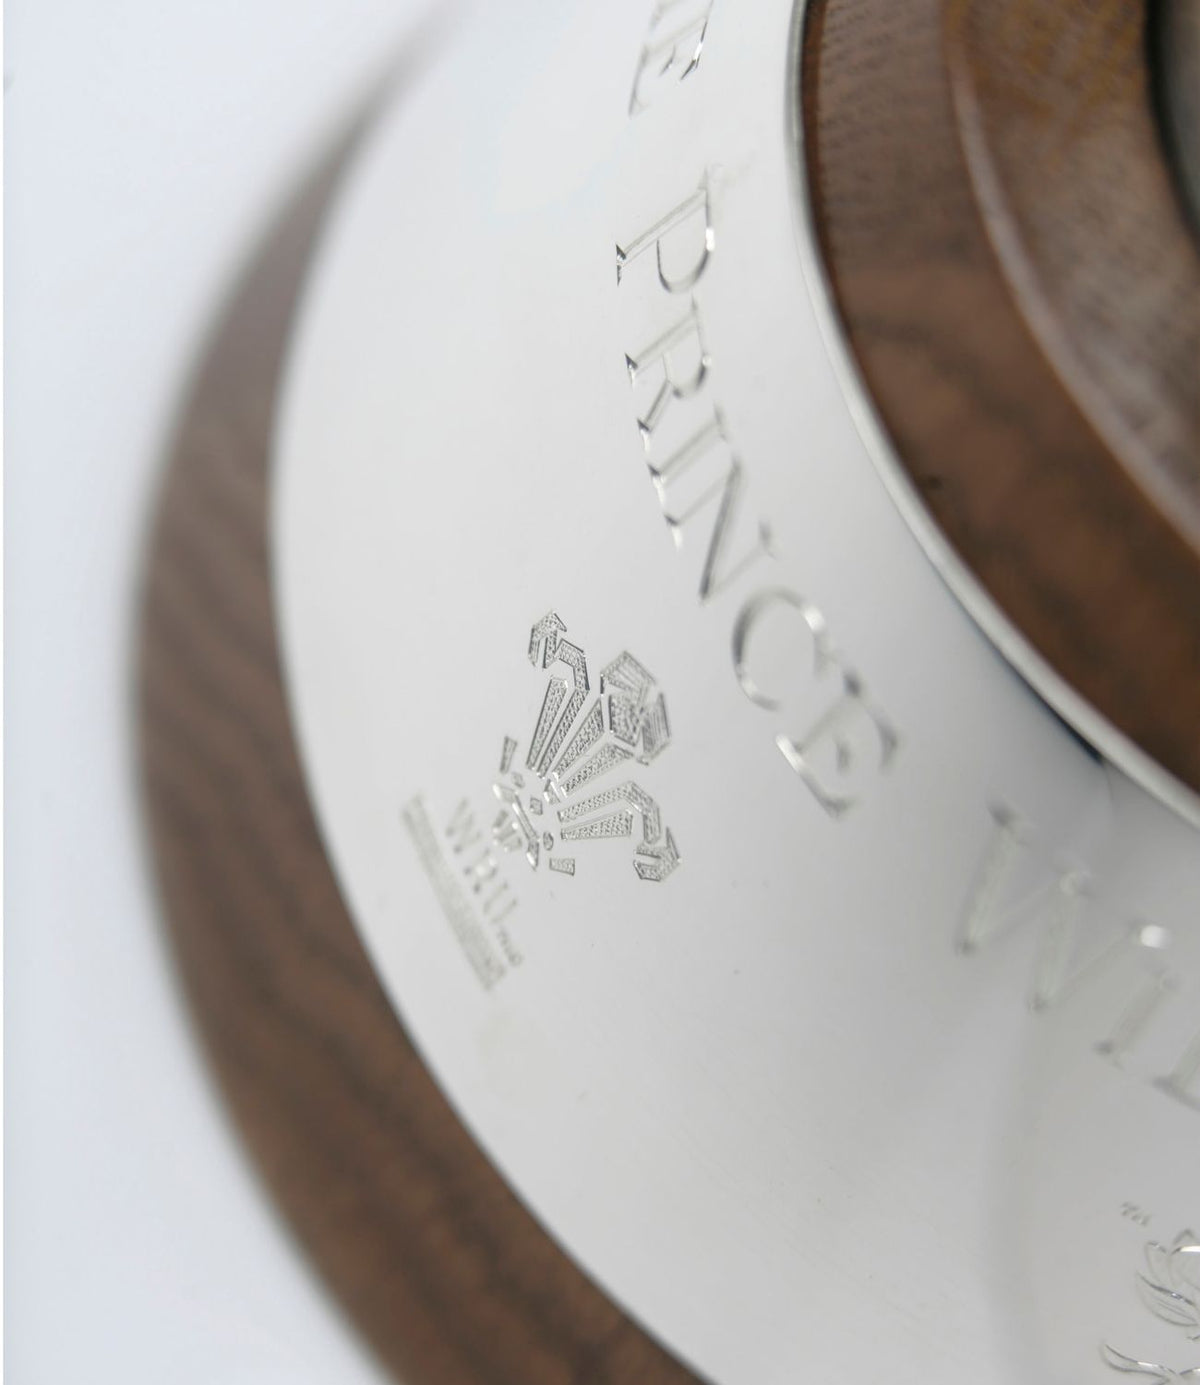 Prince William cup base in wood and silver with engraving